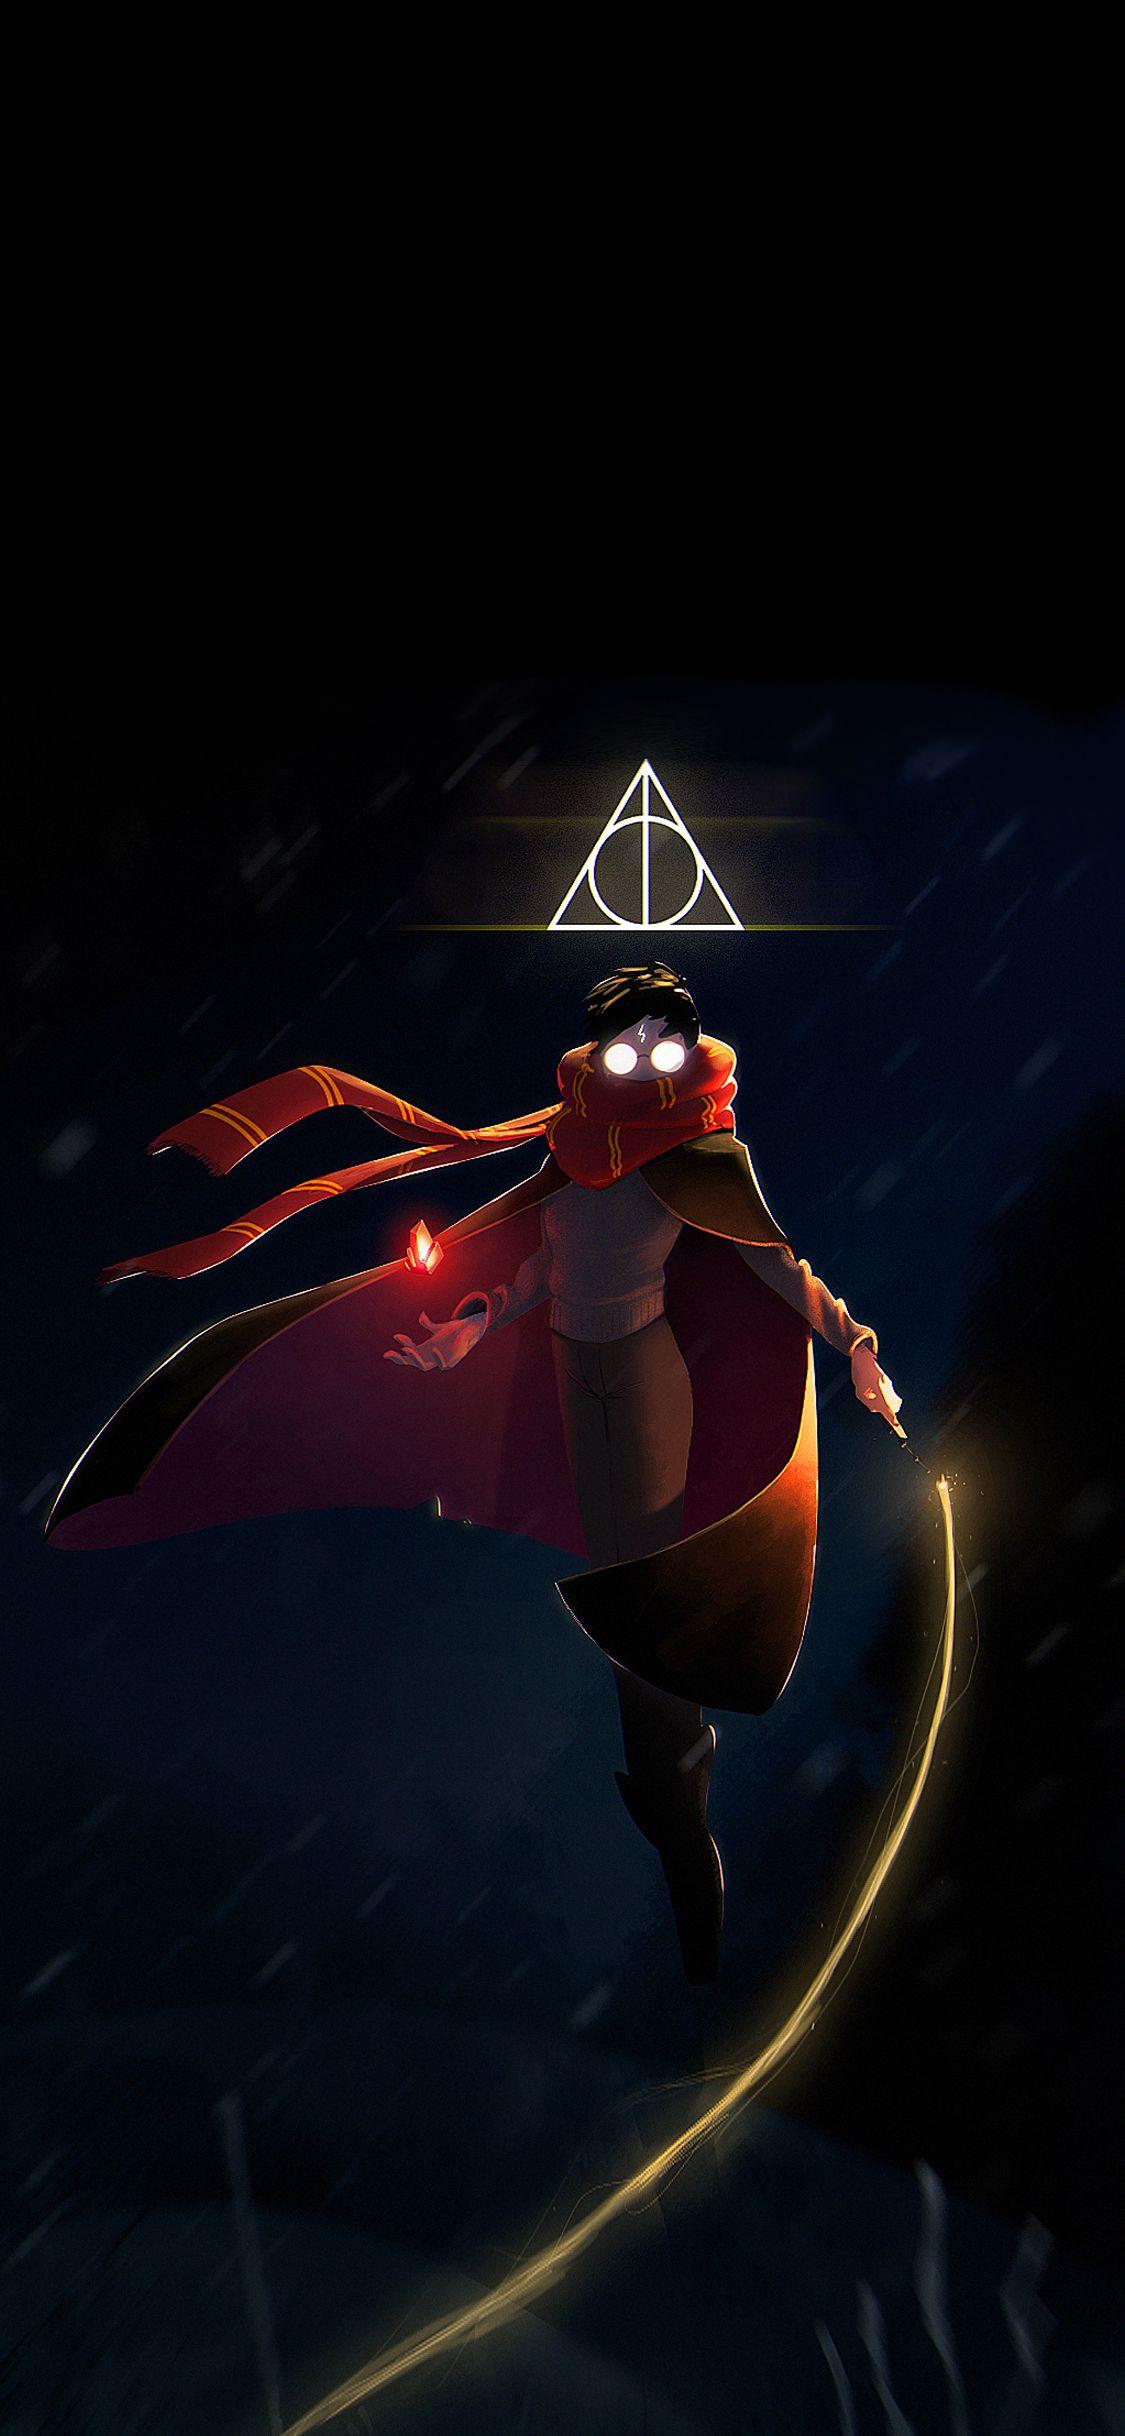 Harry Potter for iPhone X. Harry potter wallpaper, Harry potter iphone, Cartoons 3D wallpaper